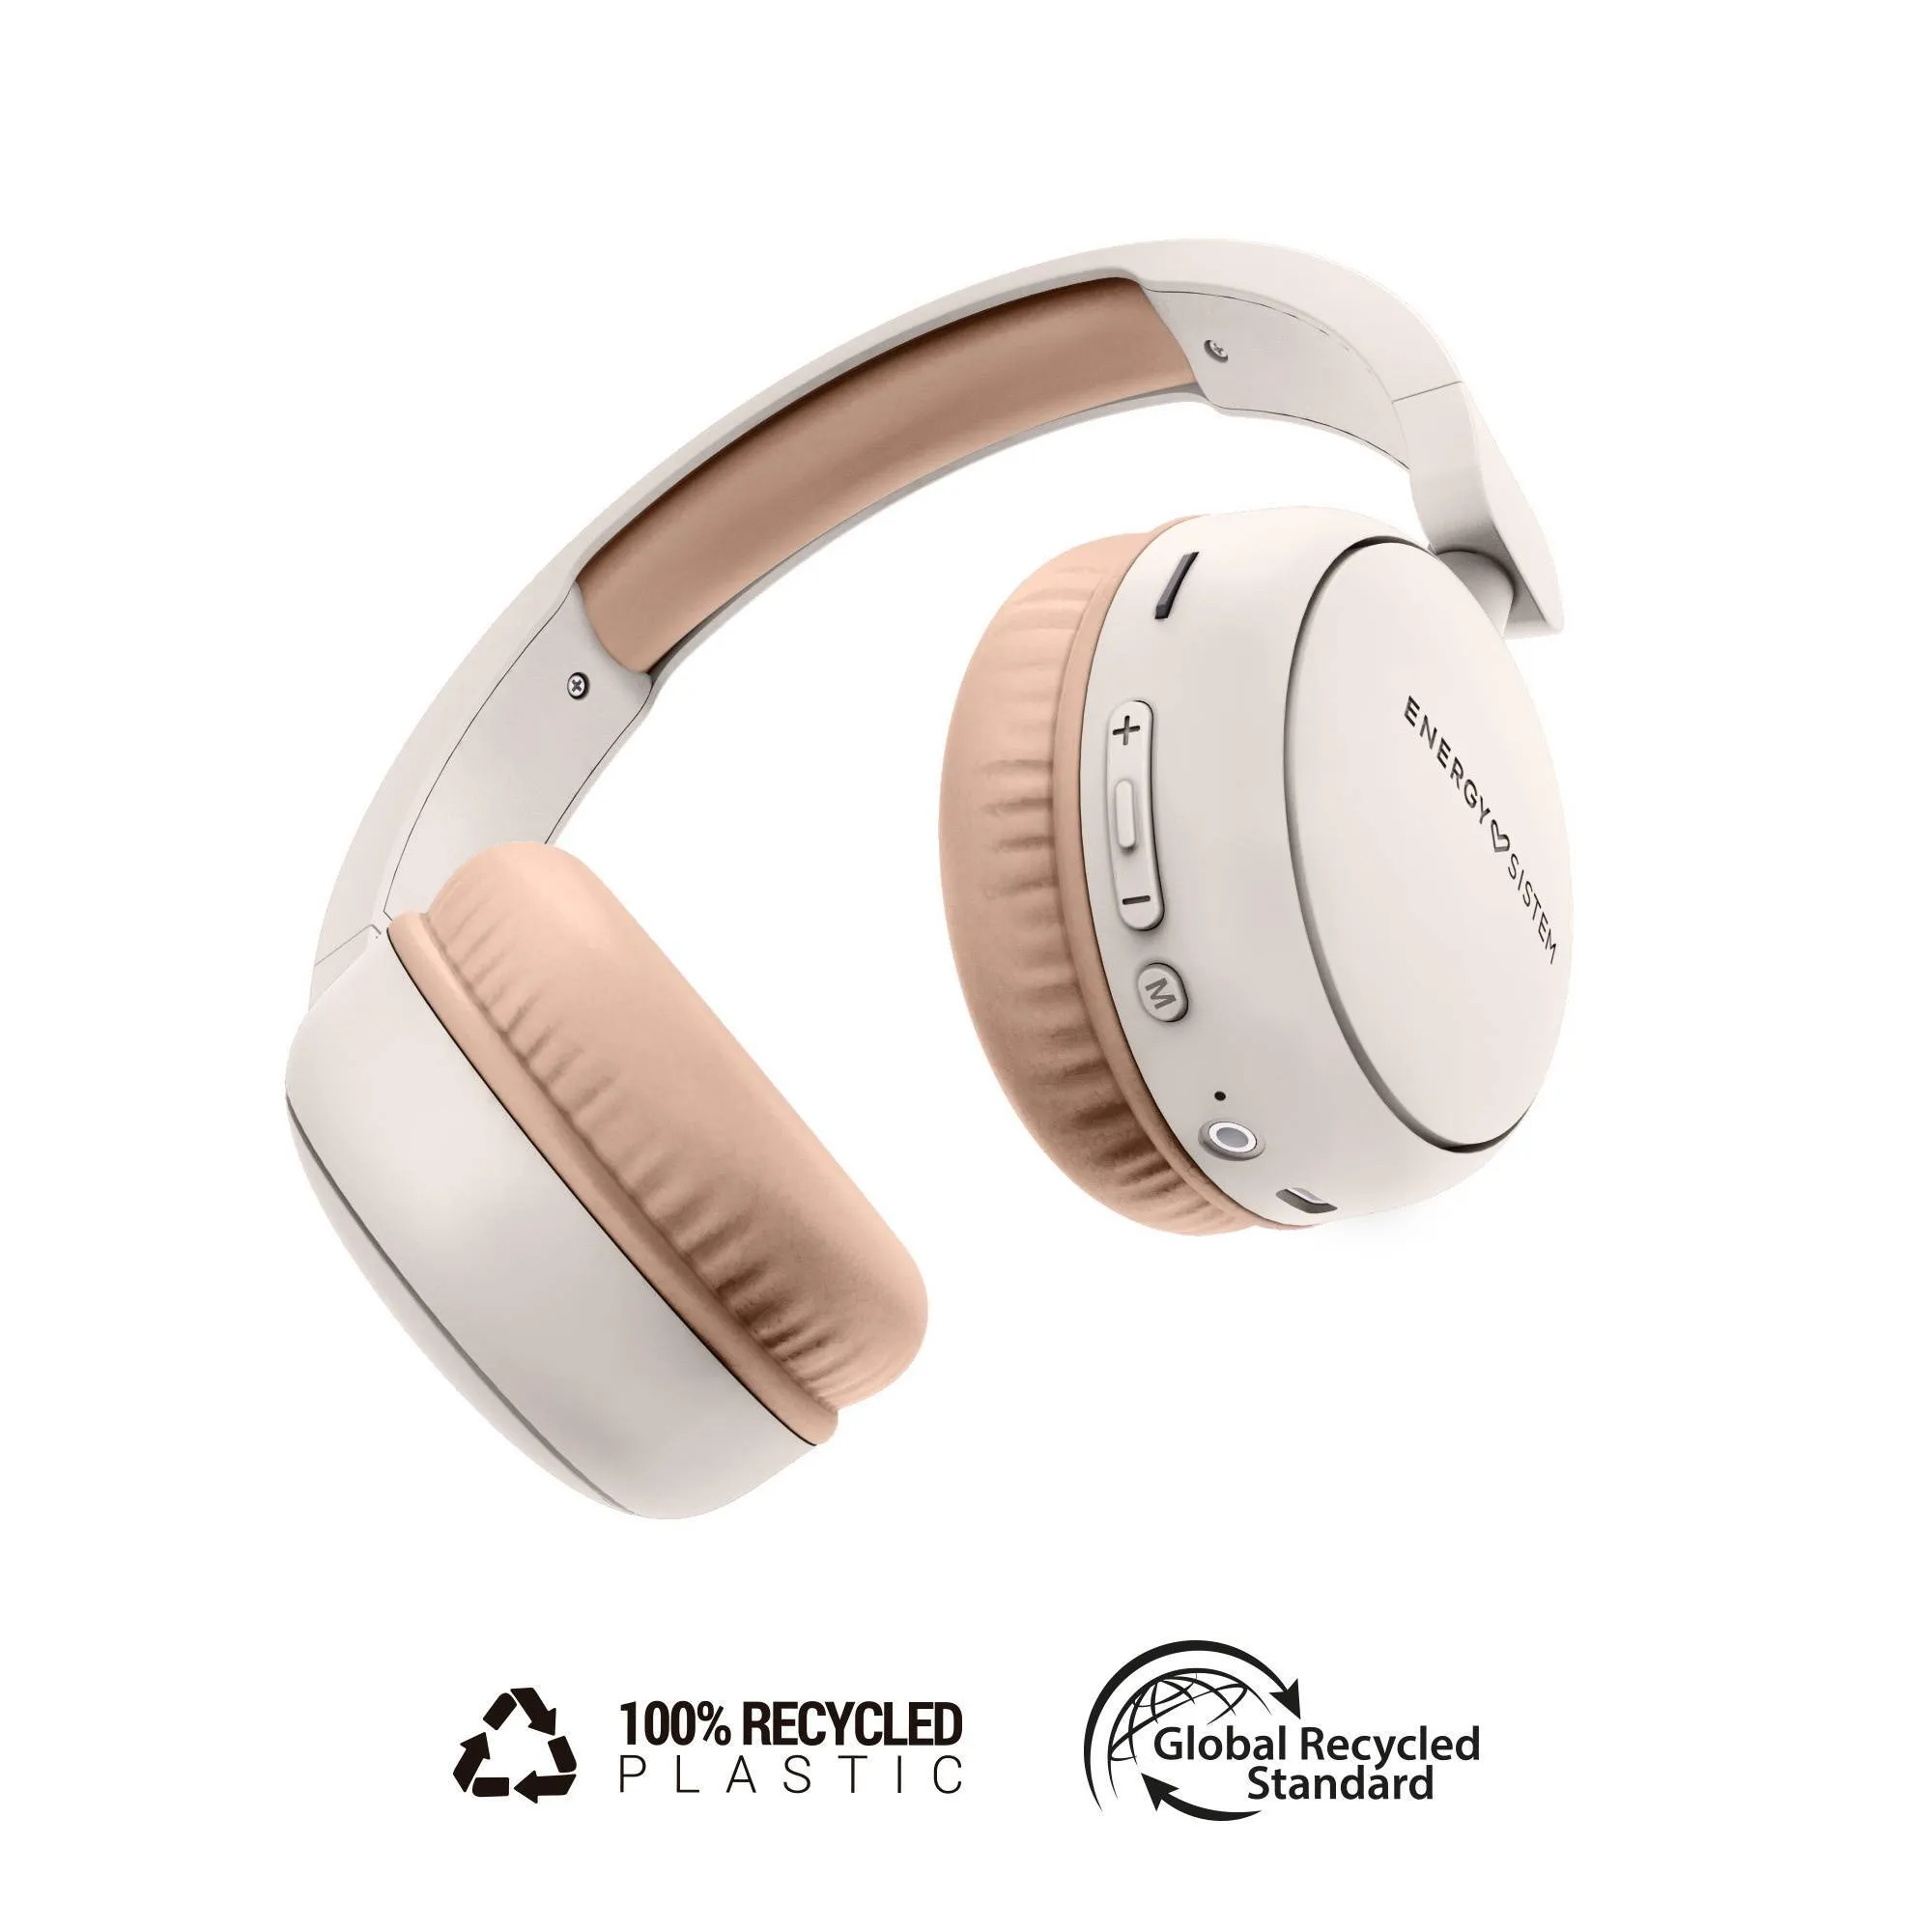 Radio Color cream Buetooth headphones made from recycled plastic, with built-in FM radio and Micro SD slo